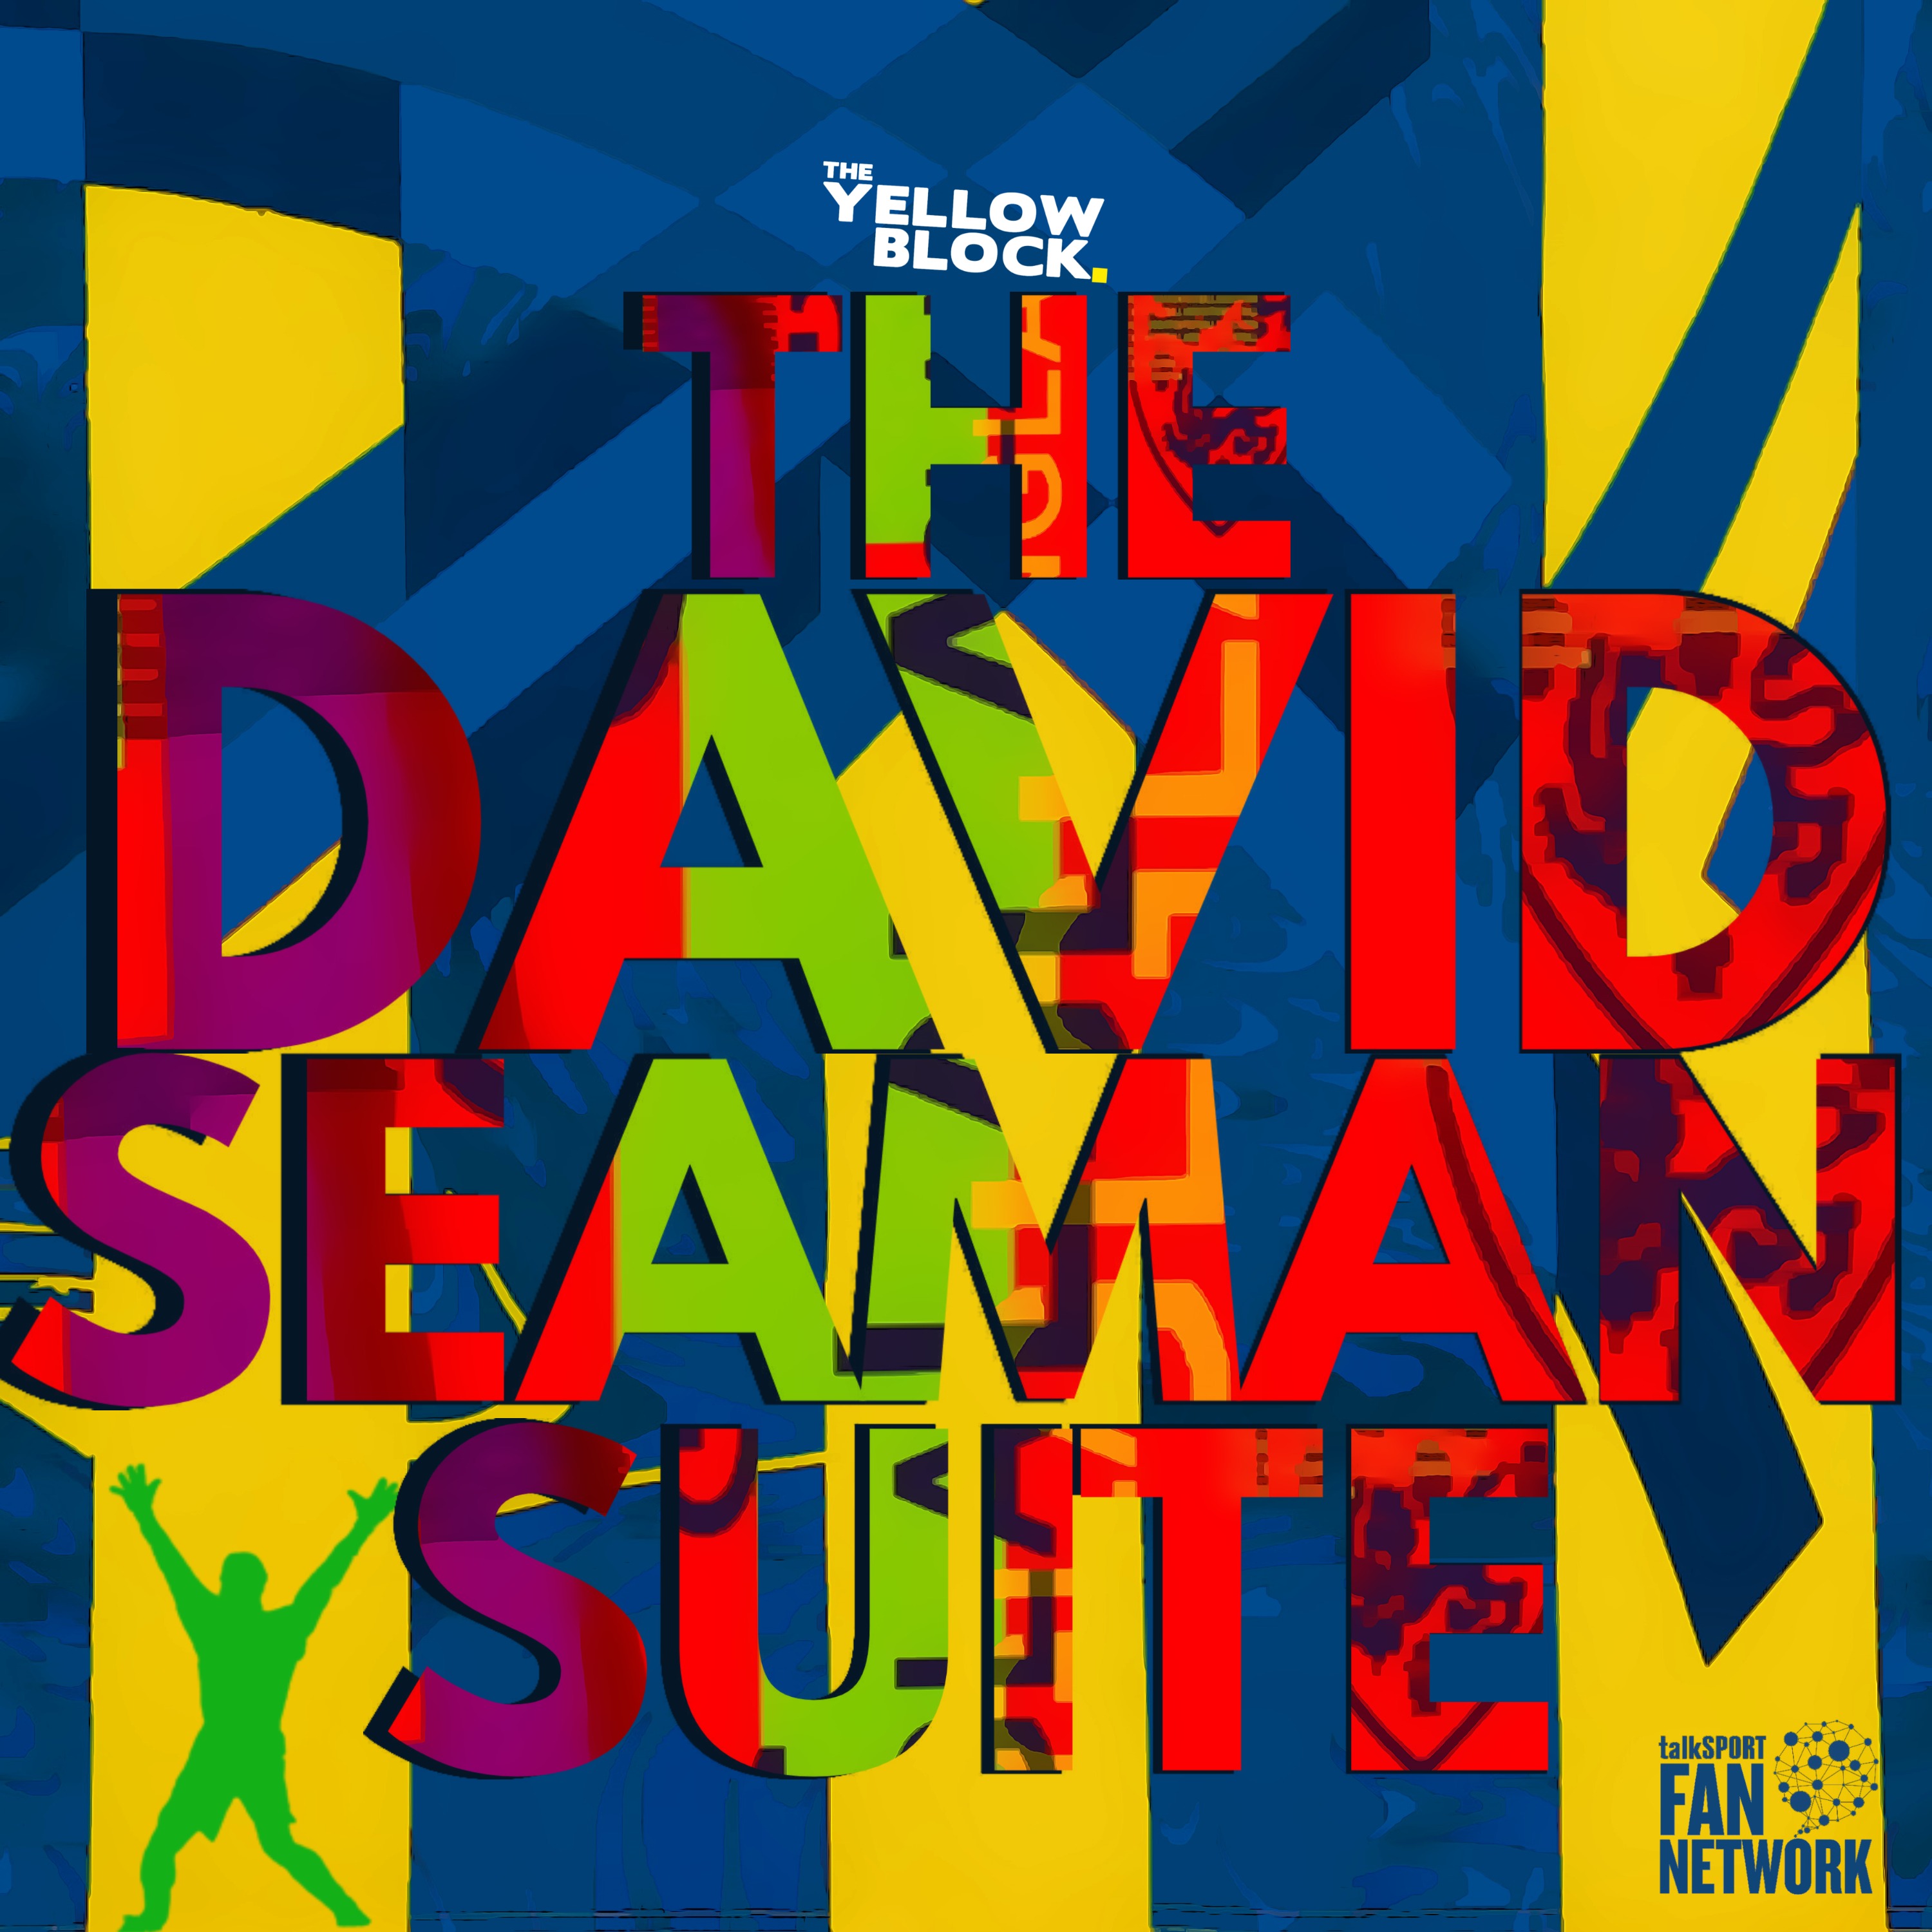 cover art for The David Seaman Suite: "Life Begins at 40"